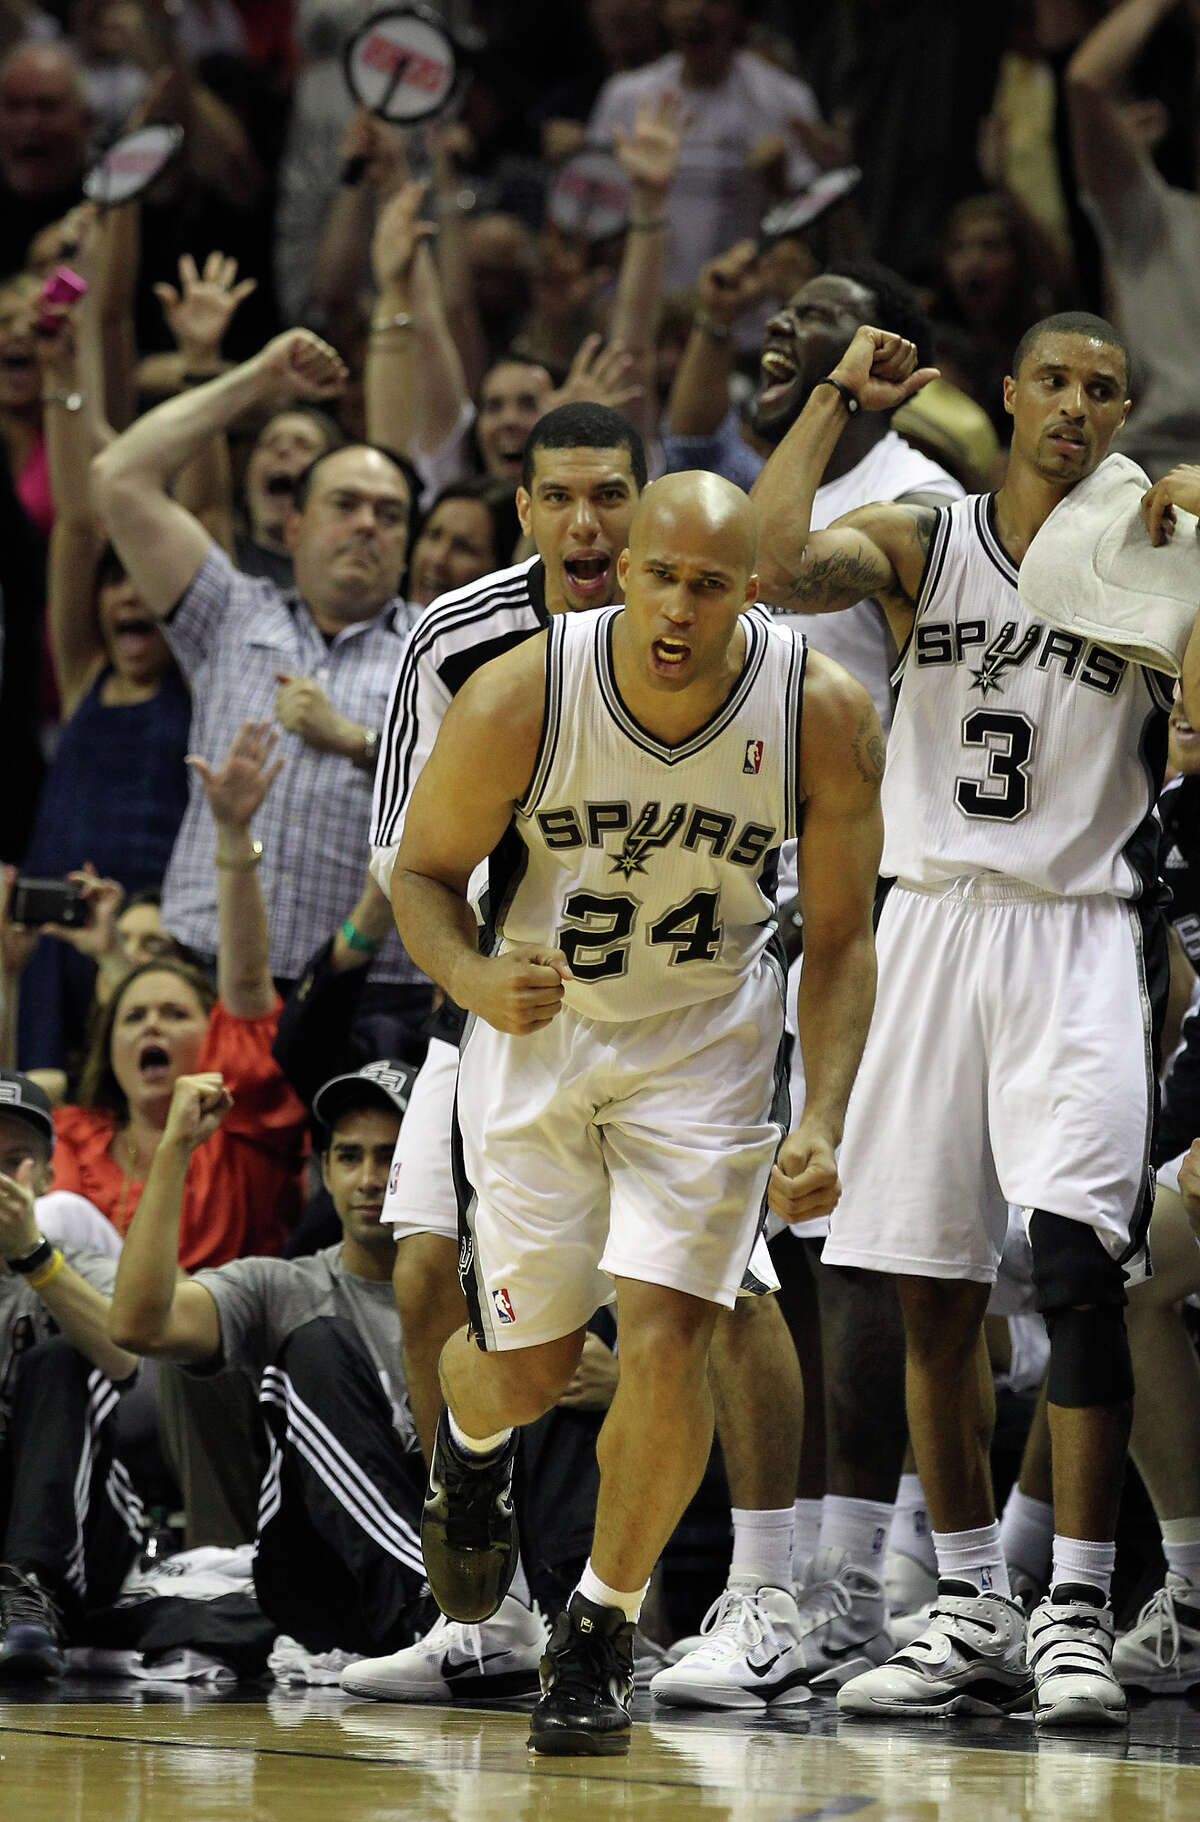 Spurs' Richard Jefferson (24) reacts after hitting a three-pointer against Memphis Grizzlies in the second half in the first round of the Western Conference playoffs at the AT&T Center on Wednesday, April 20, 2010. Spurs won 98-87. Kin Man Hui/kmhui@express-news.net